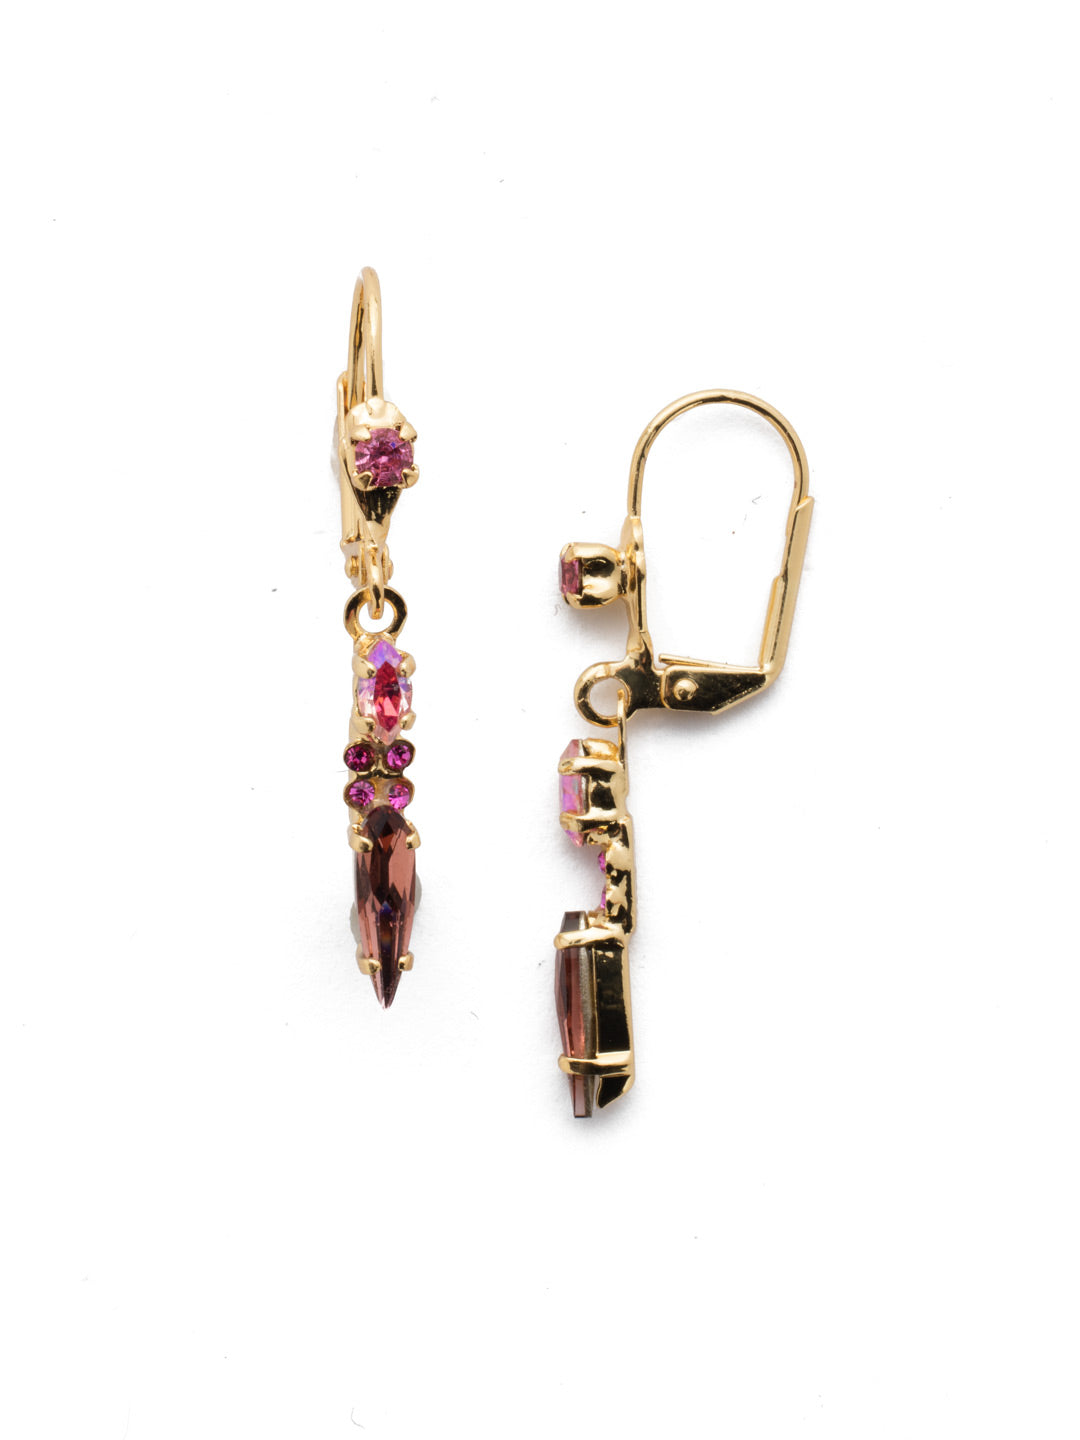 Oleana Dangle Earrings - EES18BGBGA - The Oleana Dangle Earrings are sophisticated and edgy all at once, ending with a bang in the form of a sharp marquise crystal. From Sorrelli's Begonia collection in our Bright Gold-tone finish.